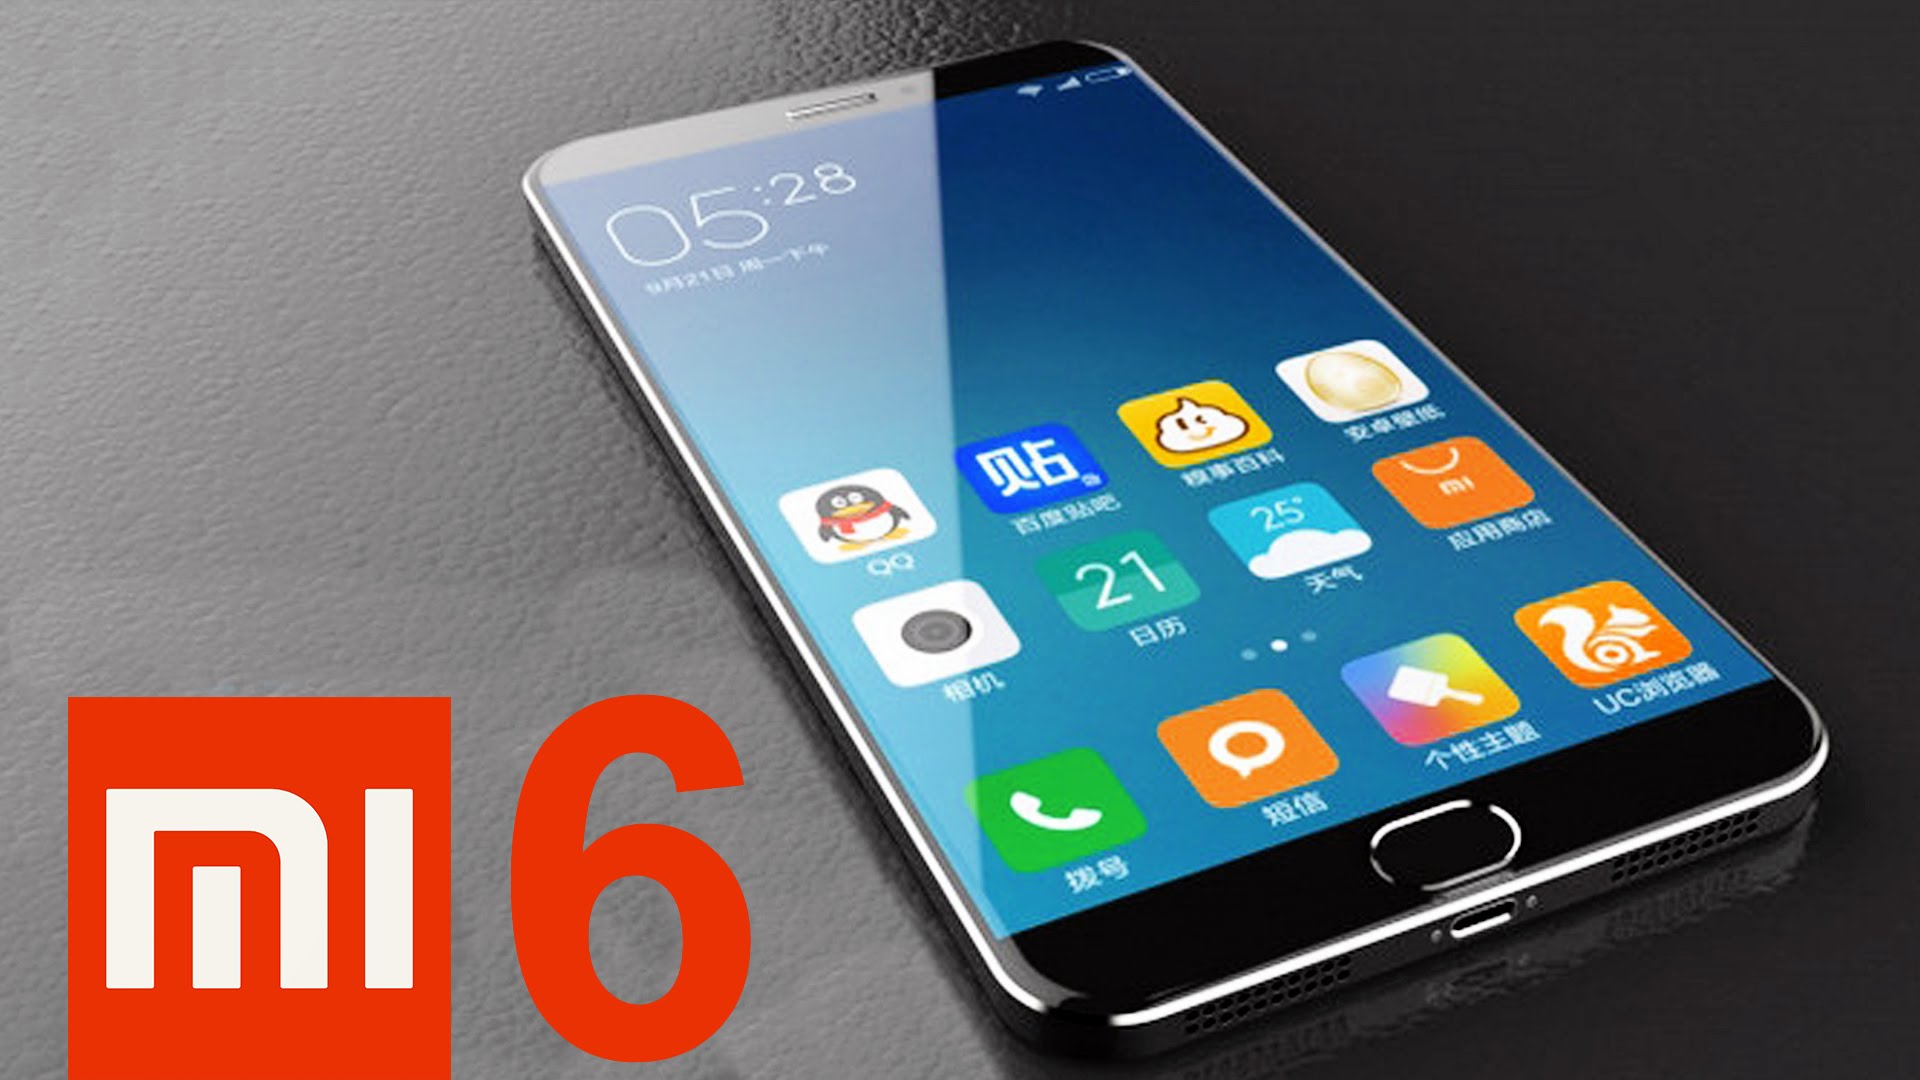 Xiaomi Mi 6 News, Rumors, release date and Some irresistible features